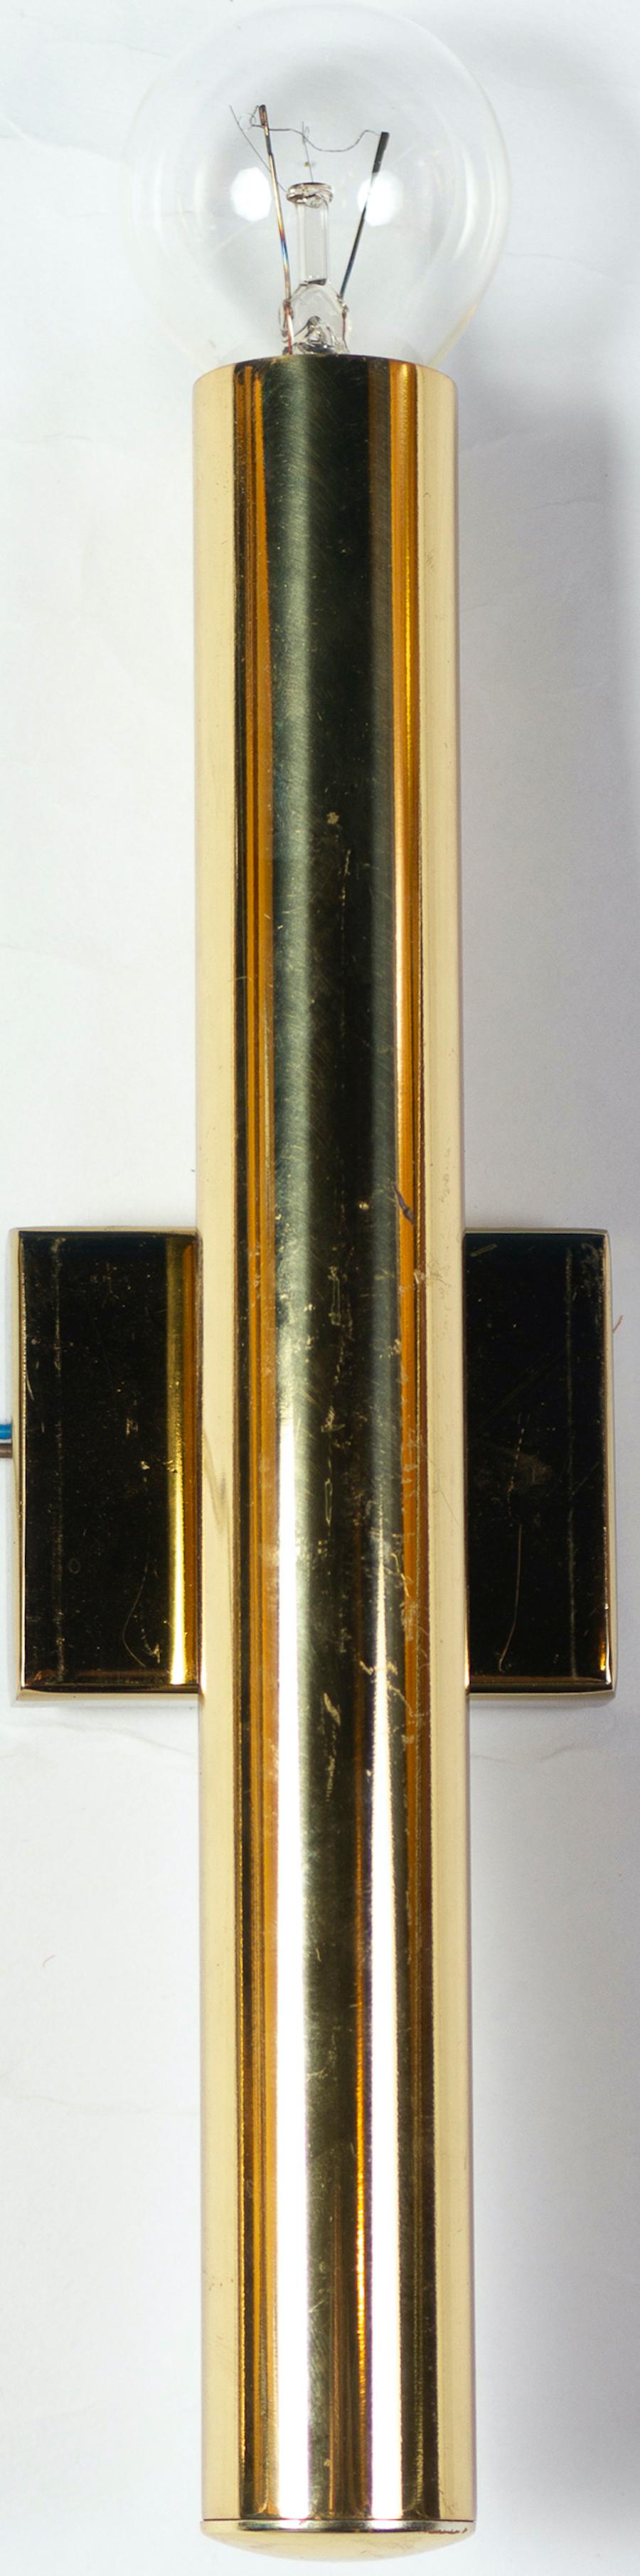 Pair of Modern Brass Sconces Attributed to Gio Ponti 1970 For Sale 2